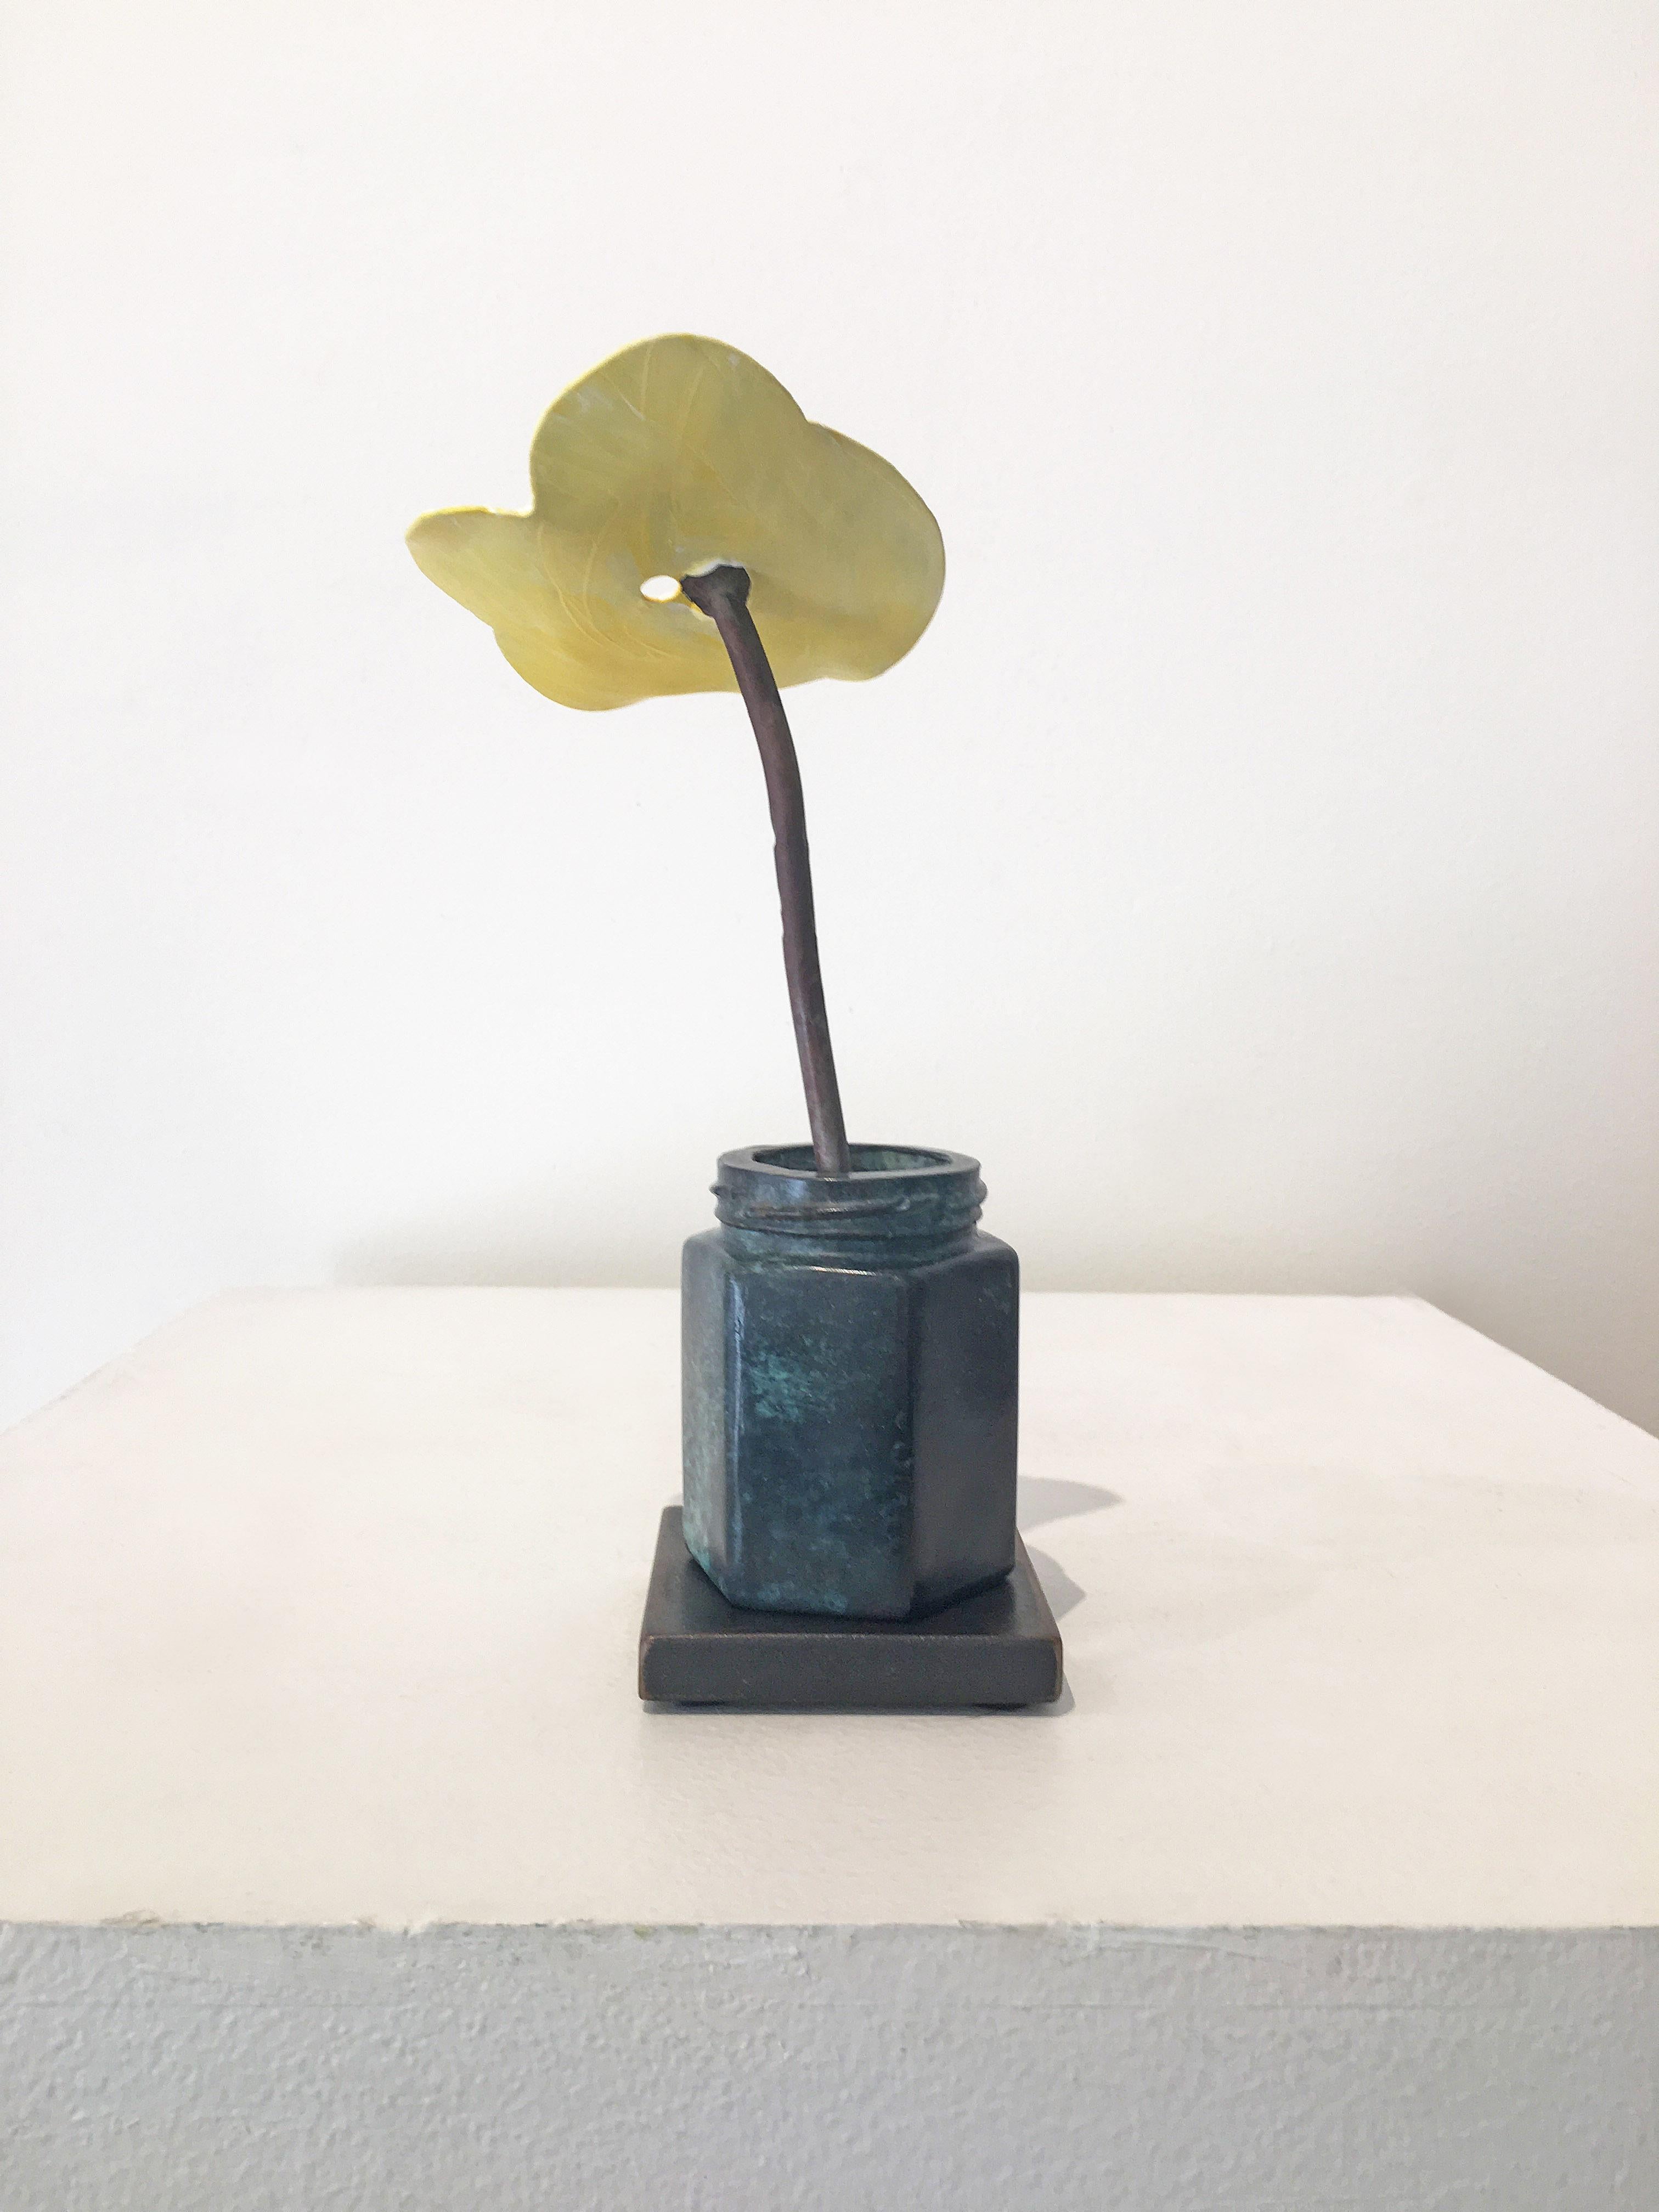 Yellow Poppy with Caper Bottle - Sculpture by David Kimball Anderson